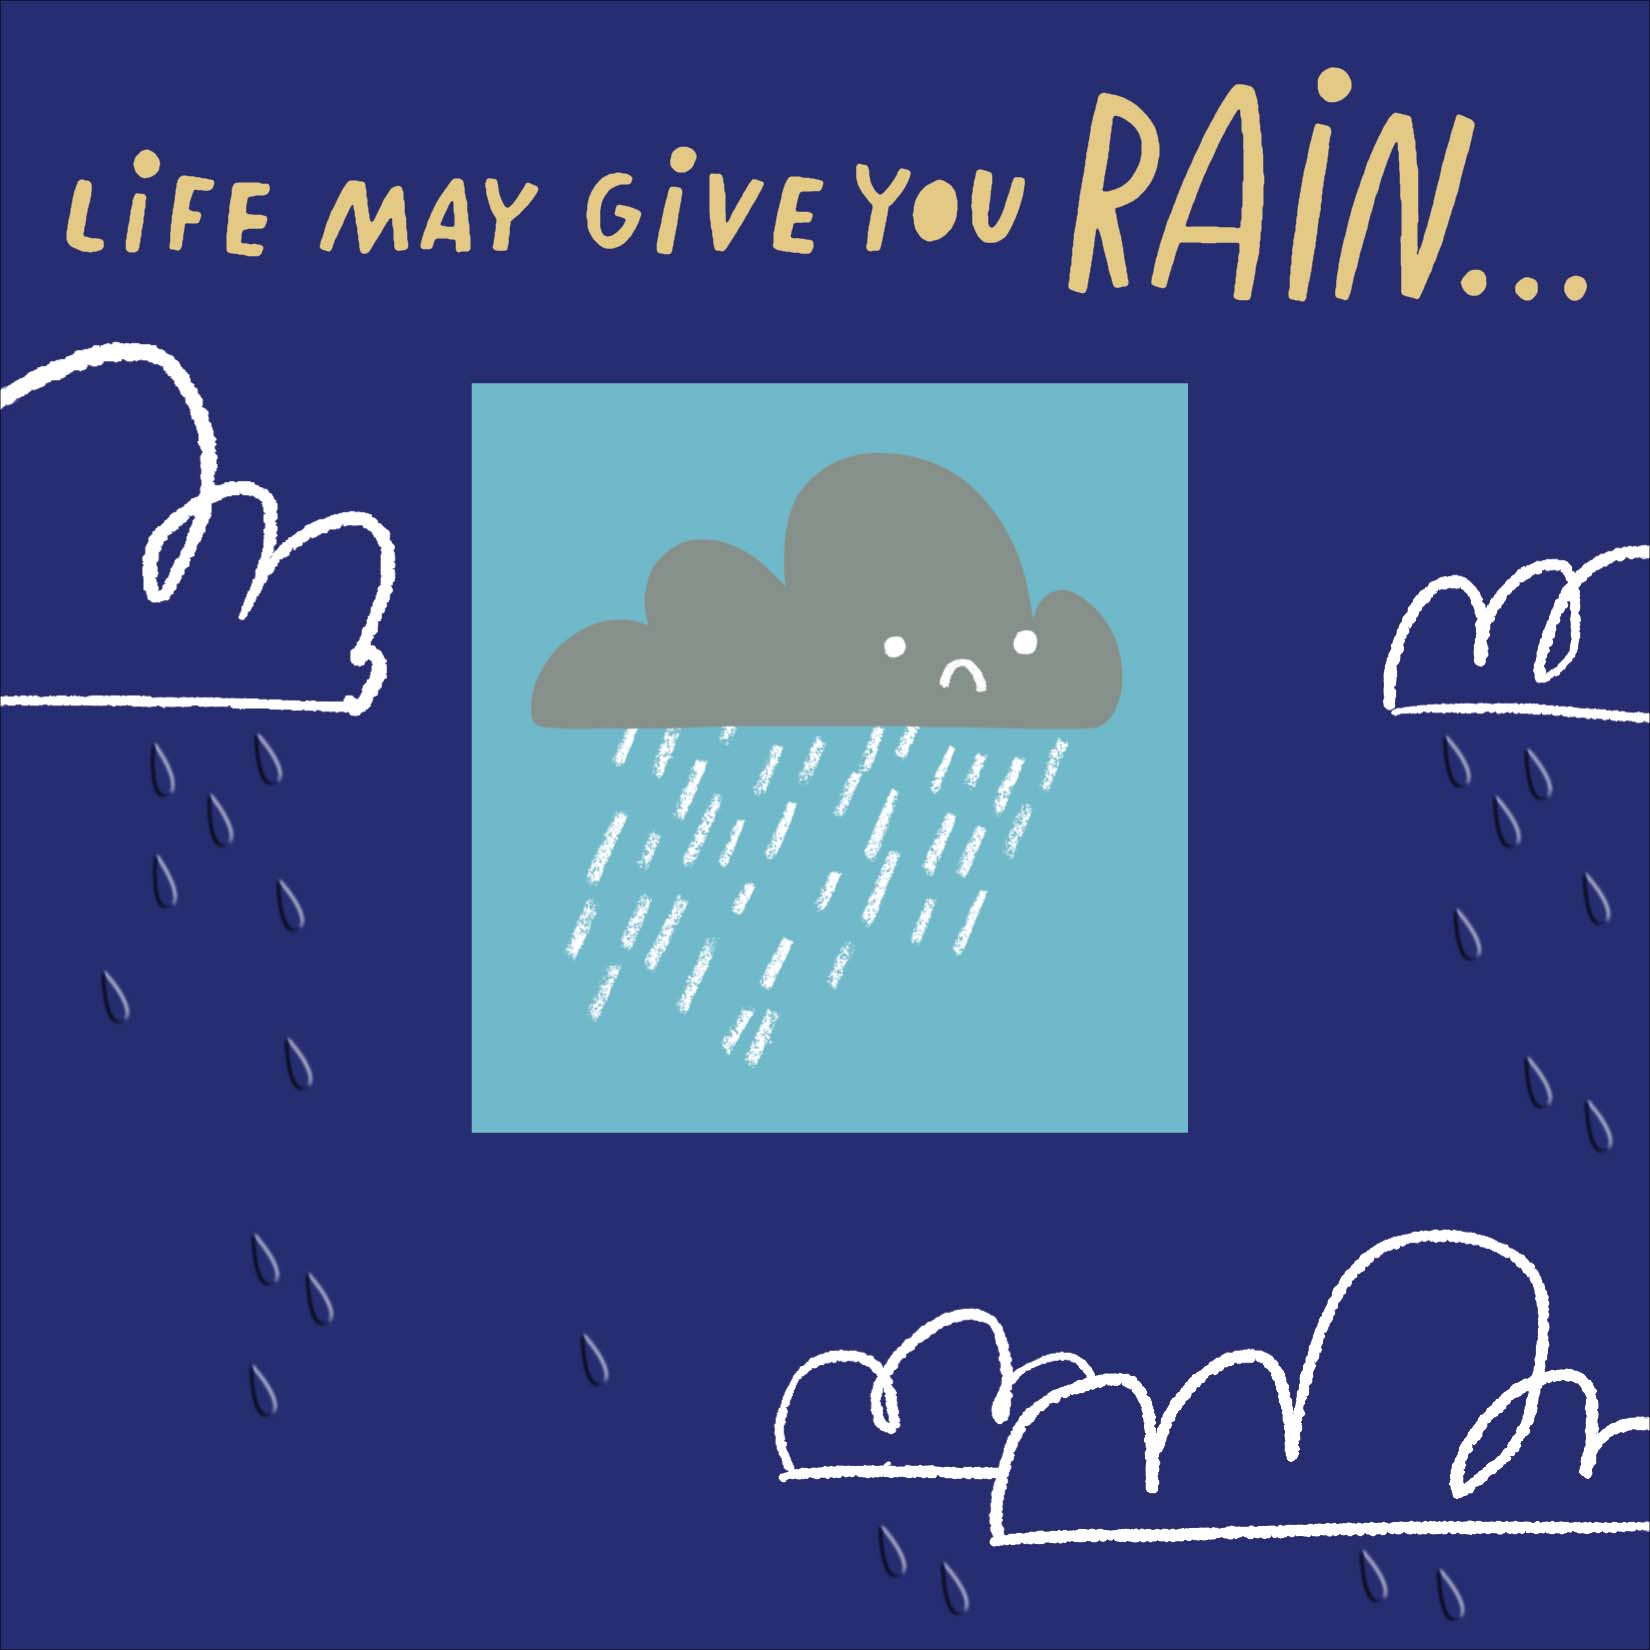 Front of Life May Give Rain Get Well Greetings Card